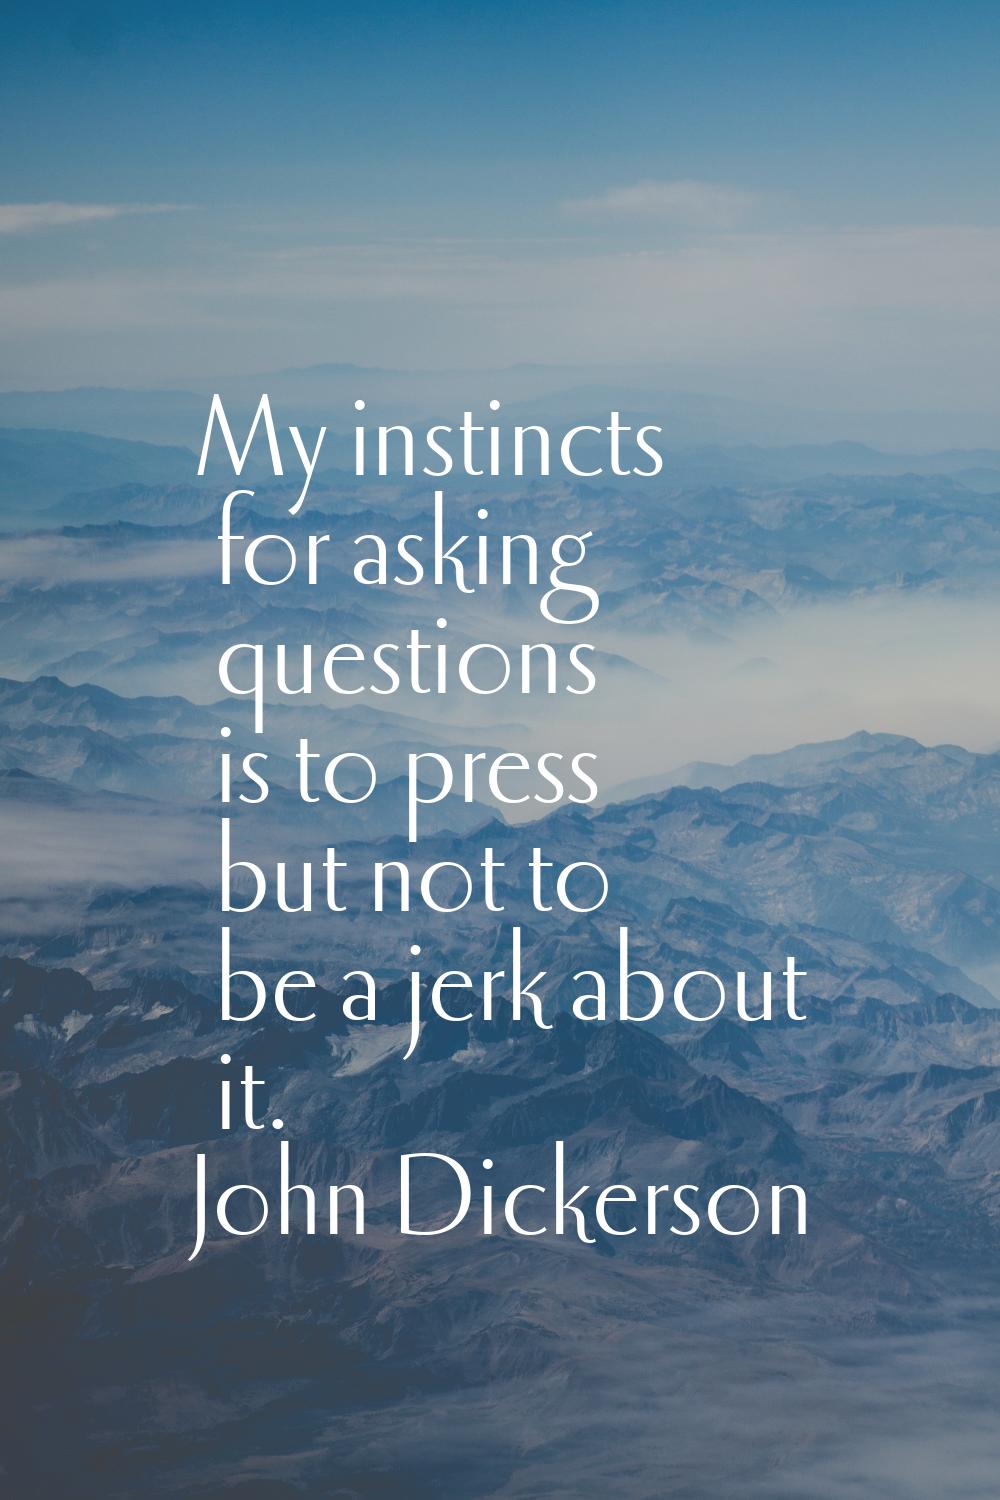 My instincts for asking questions is to press but not to be a jerk about it.